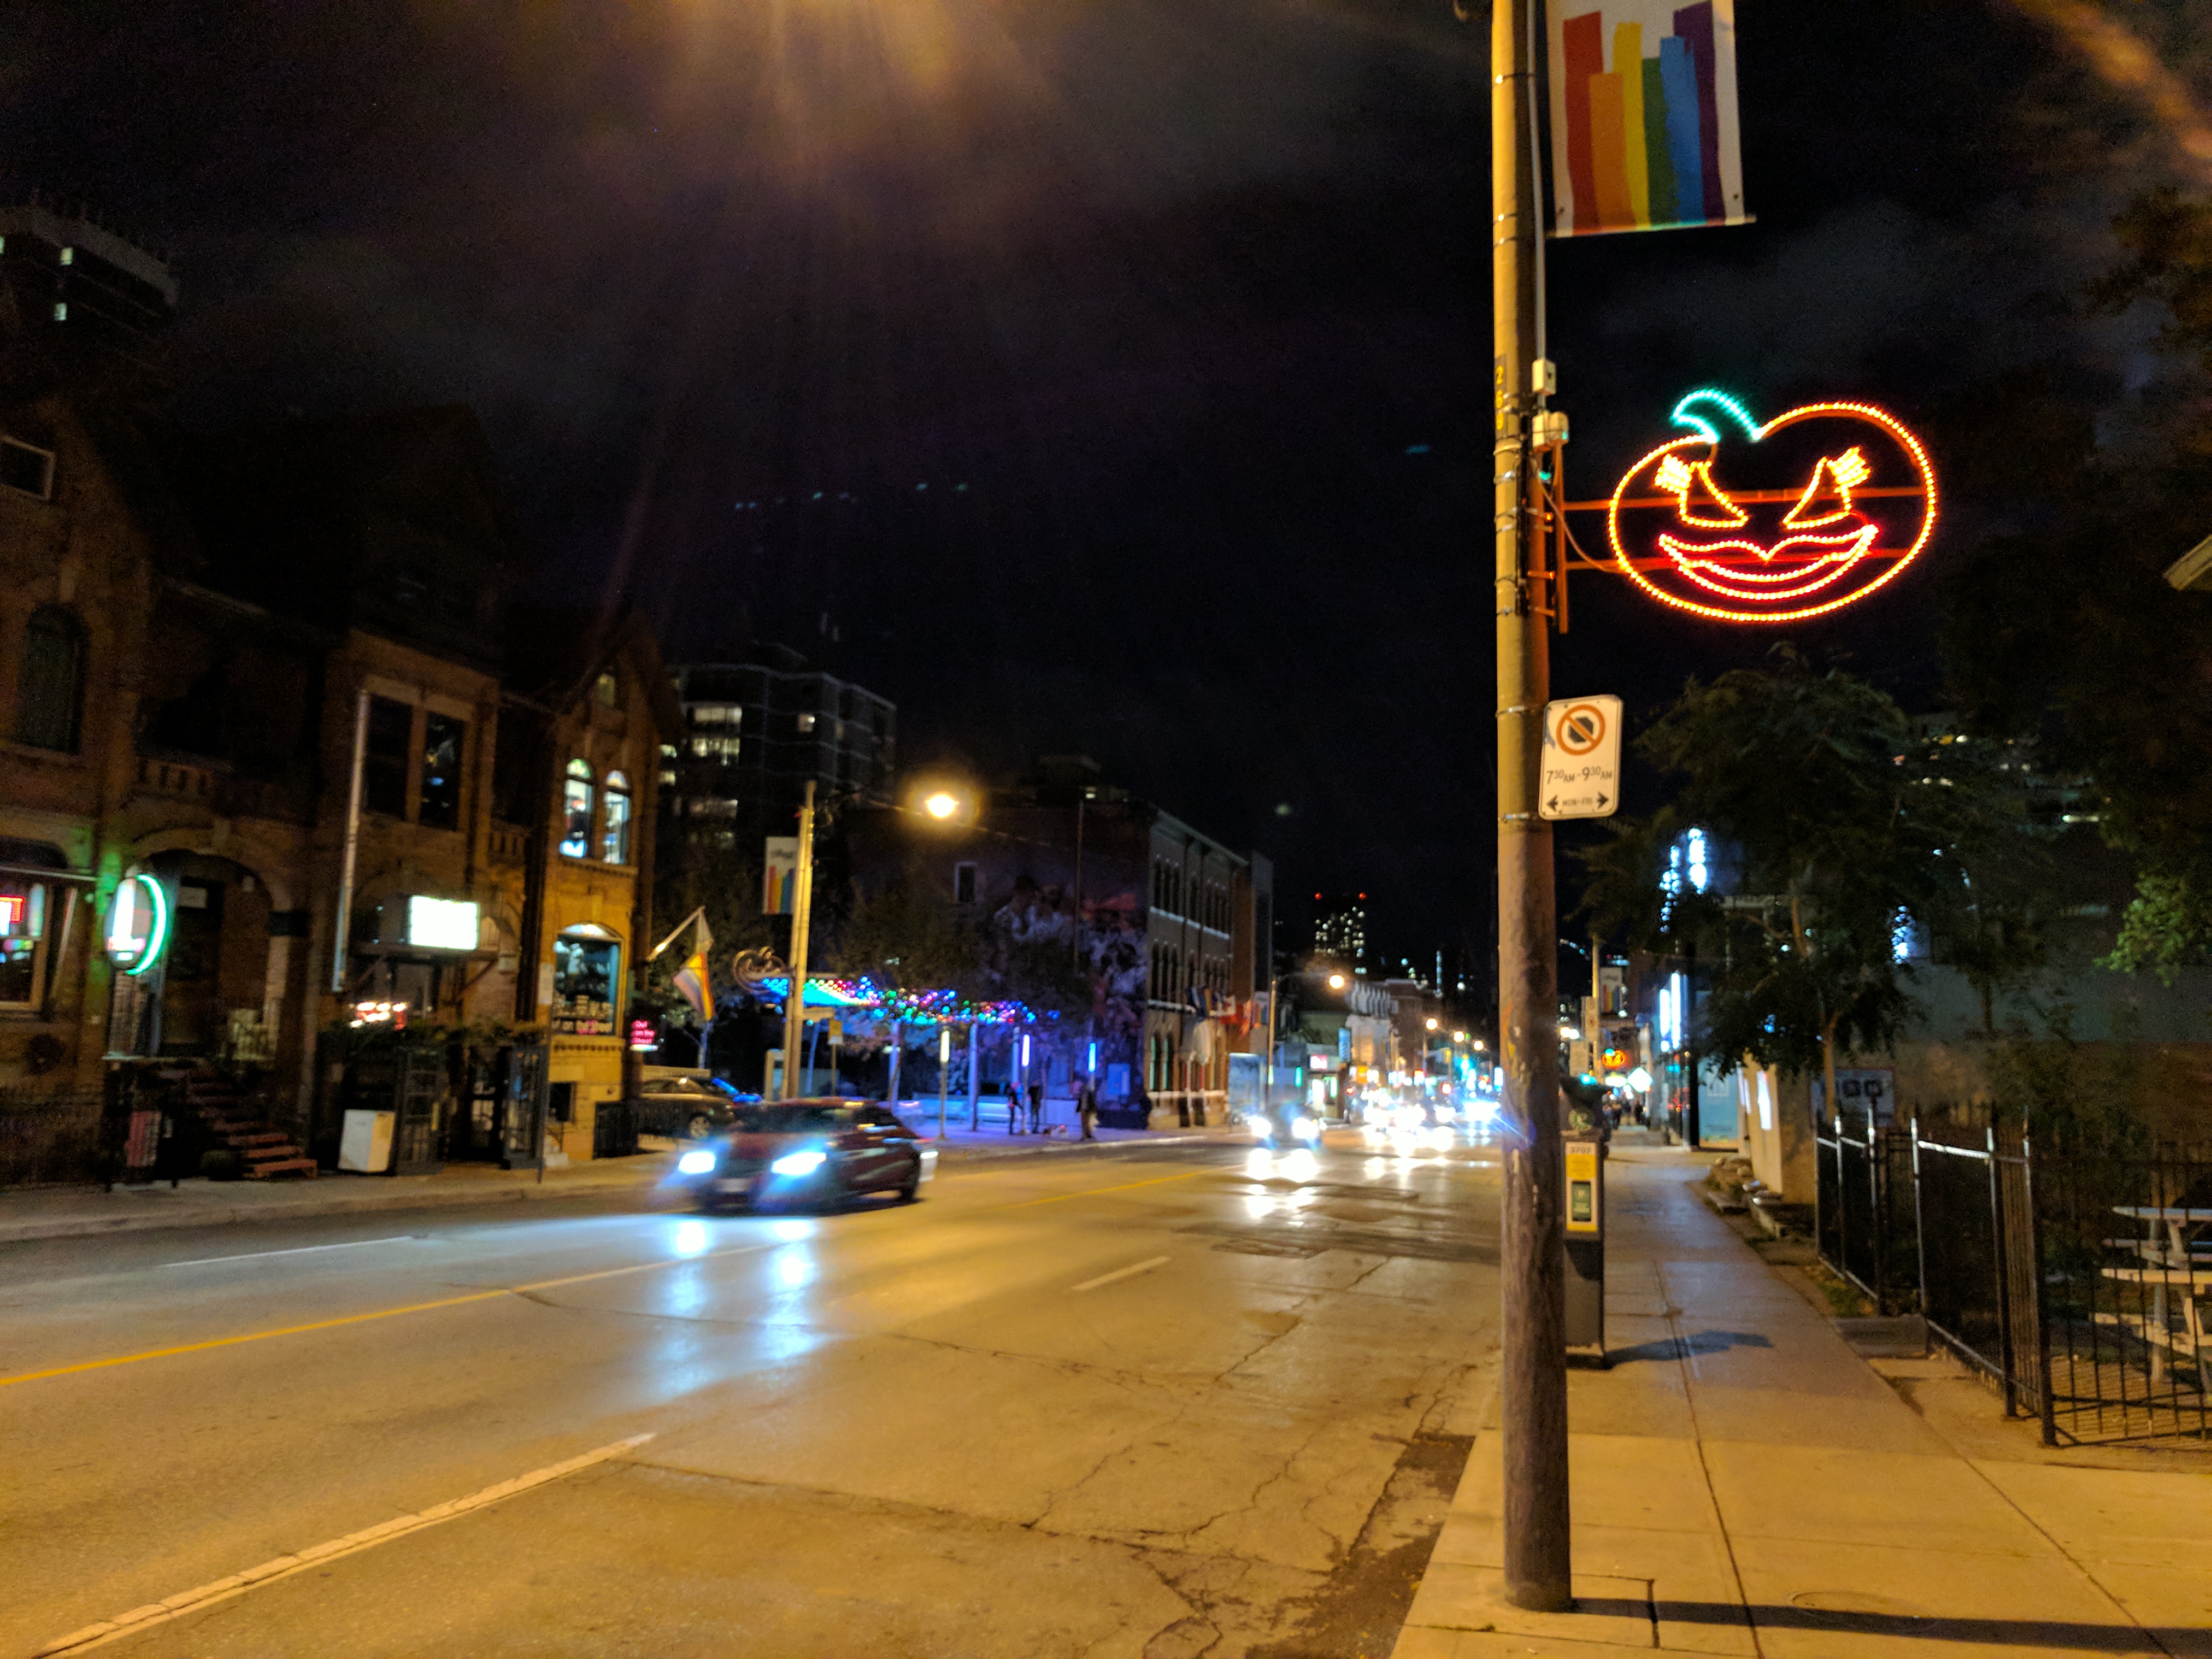 The gay street, there's a rainbow flag and a halloween pumpkin on the lightpost.